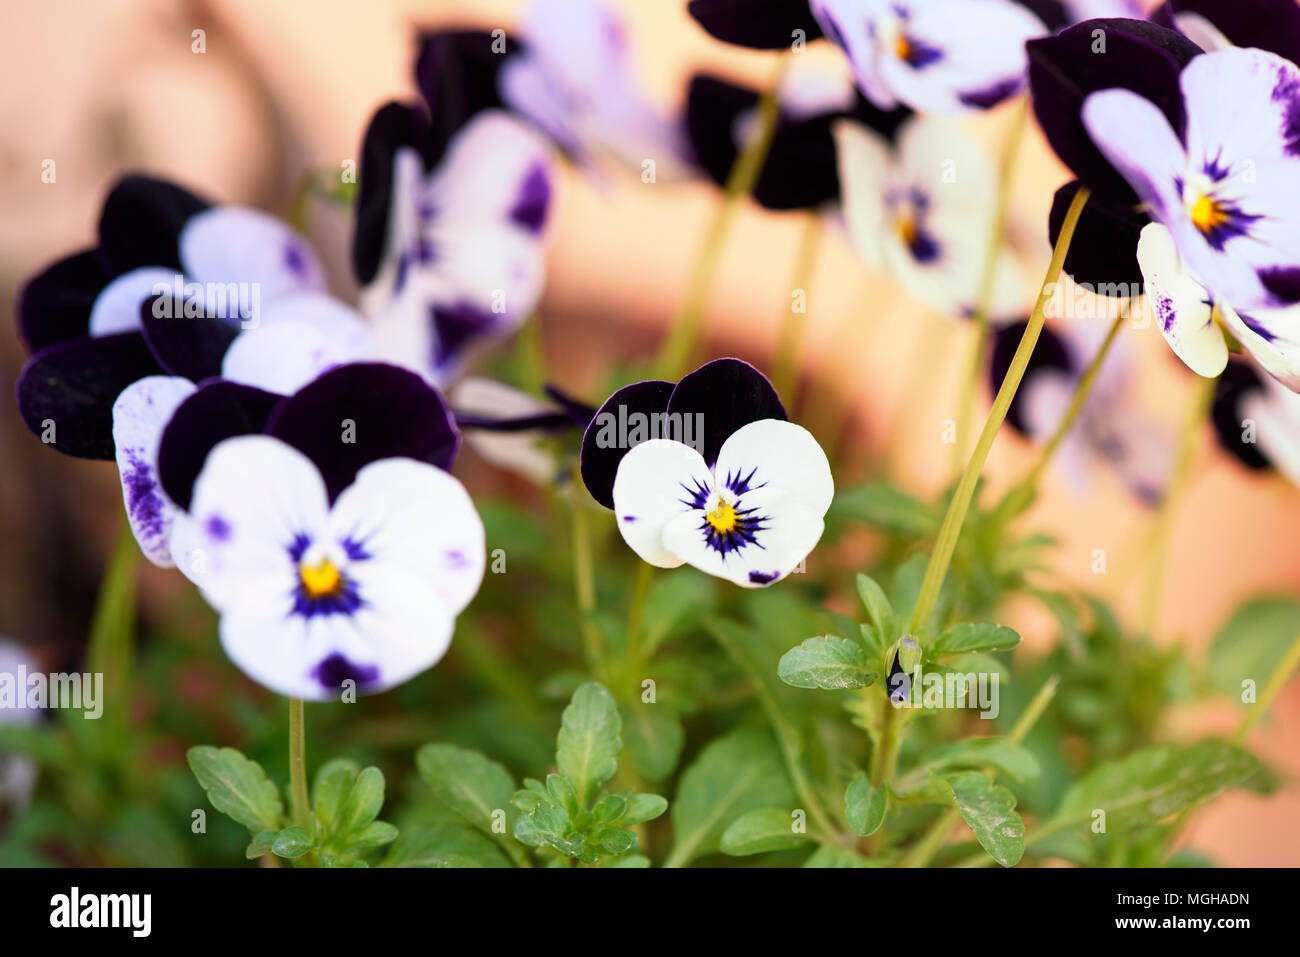 Pansy (Viola Tricolor) flower growing in the garden Stock Photo